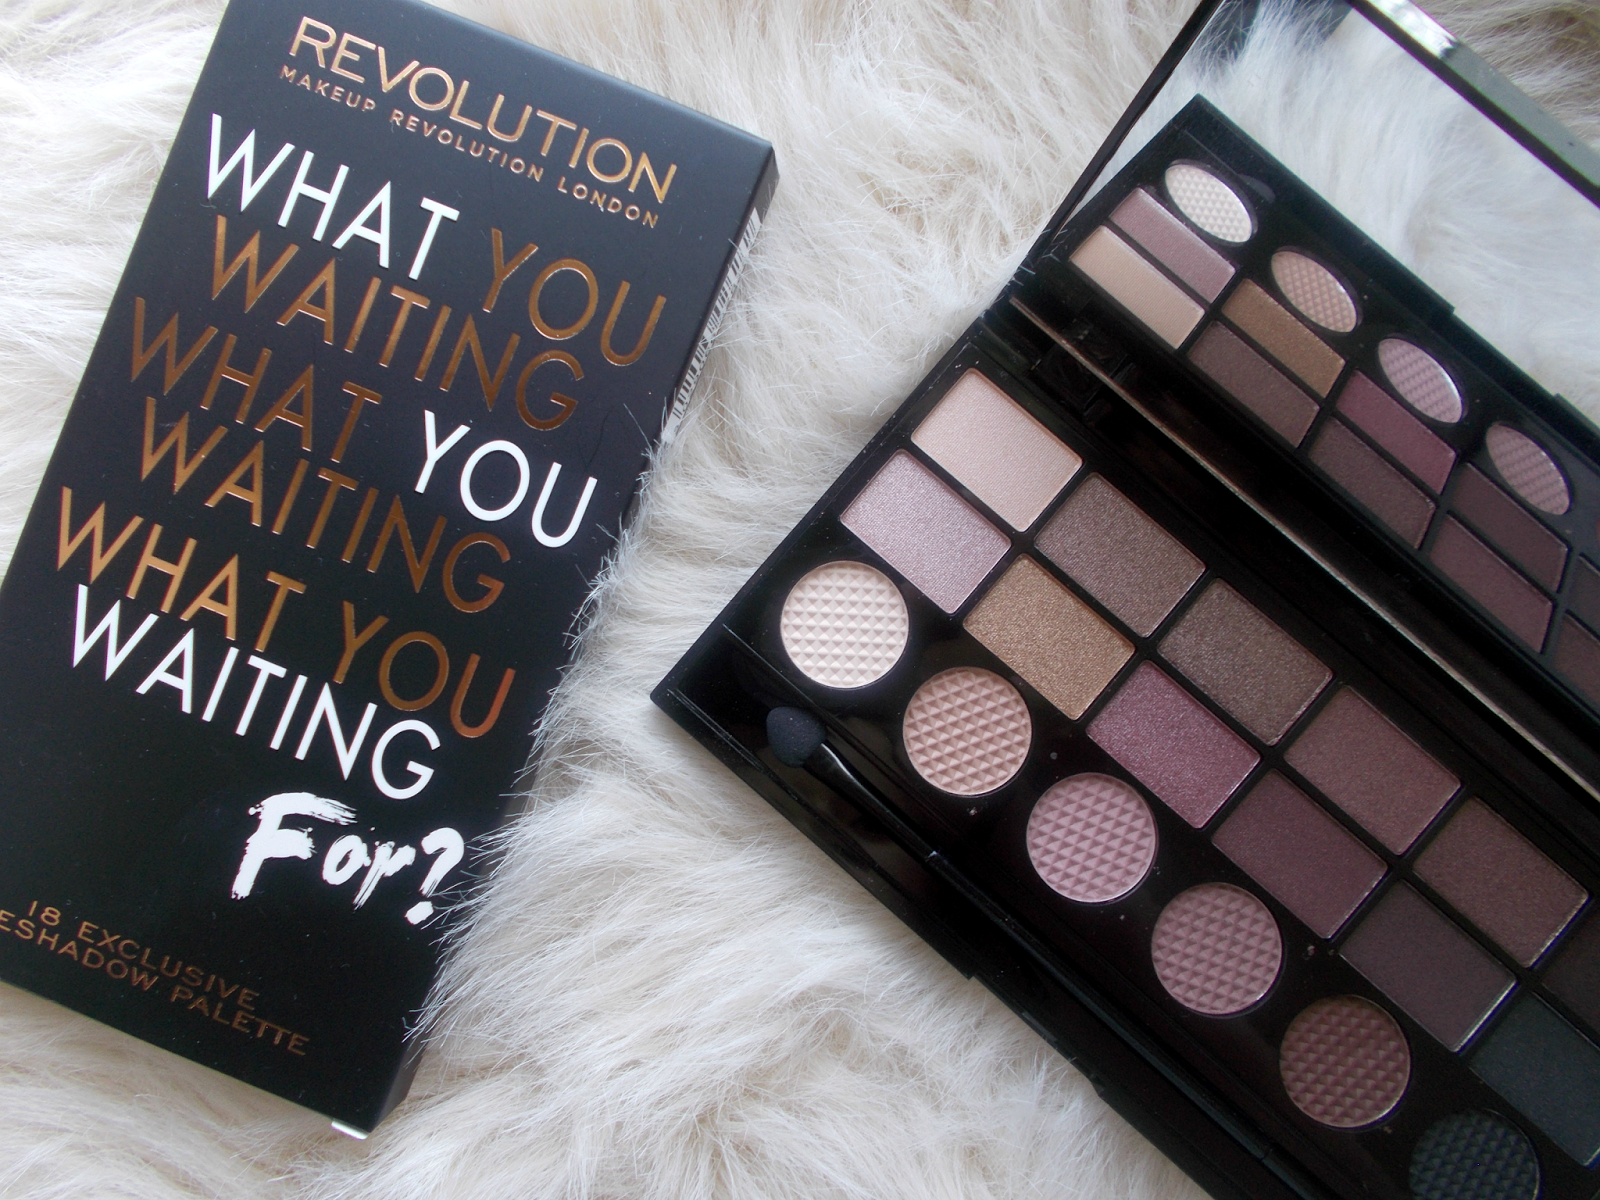 makeup revolution what you waiting for eyeshadow palette review swatches shimmer matte pink toned neutrals